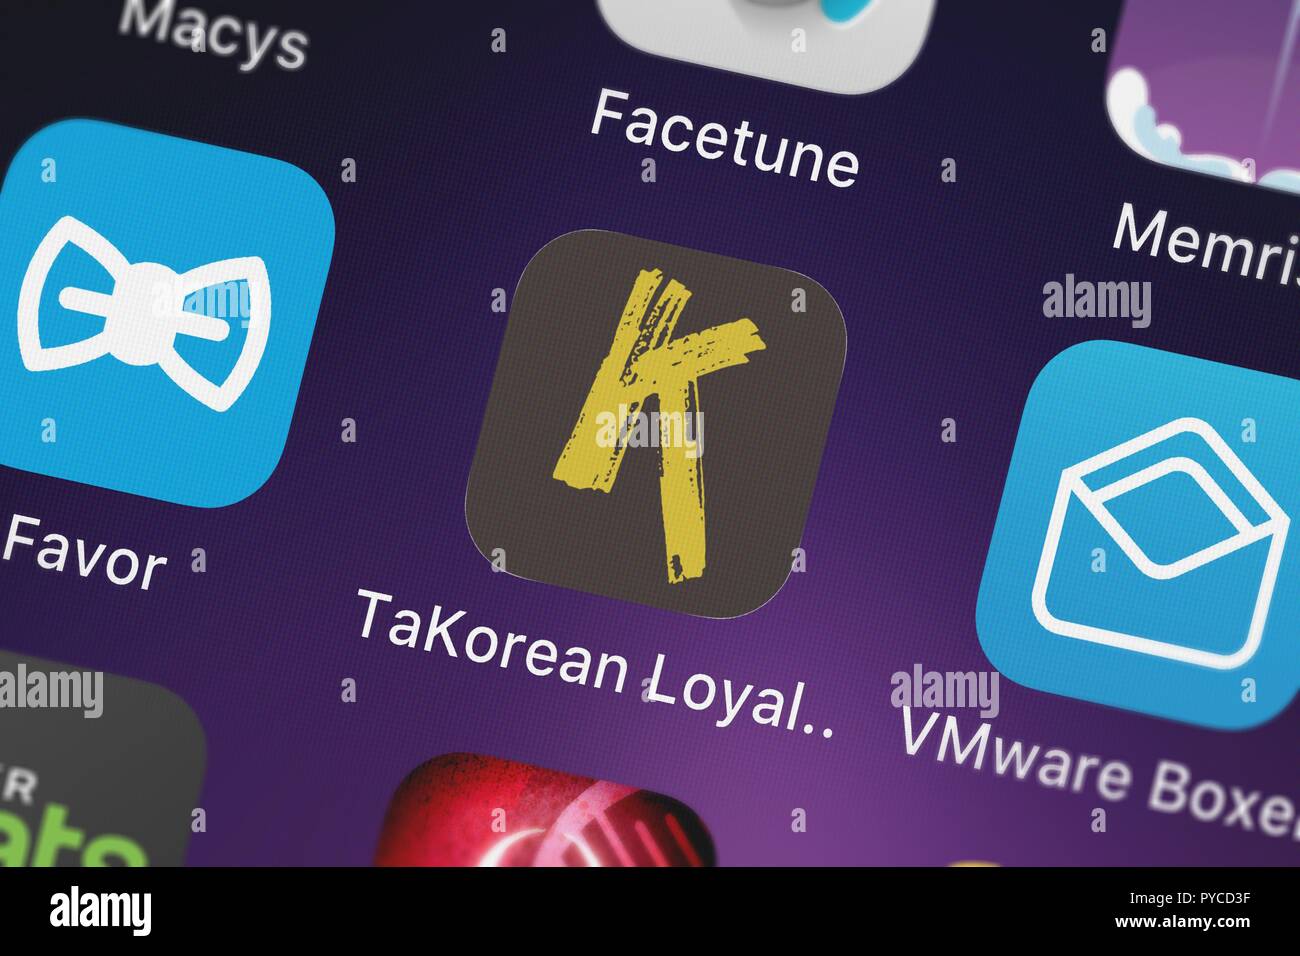 London, United Kingdom - October 26, 2018: Screenshot of the TaKorean Loyalty mobile app from LevelUp Consulting, LLC icon on an iPhone. Stock Photo